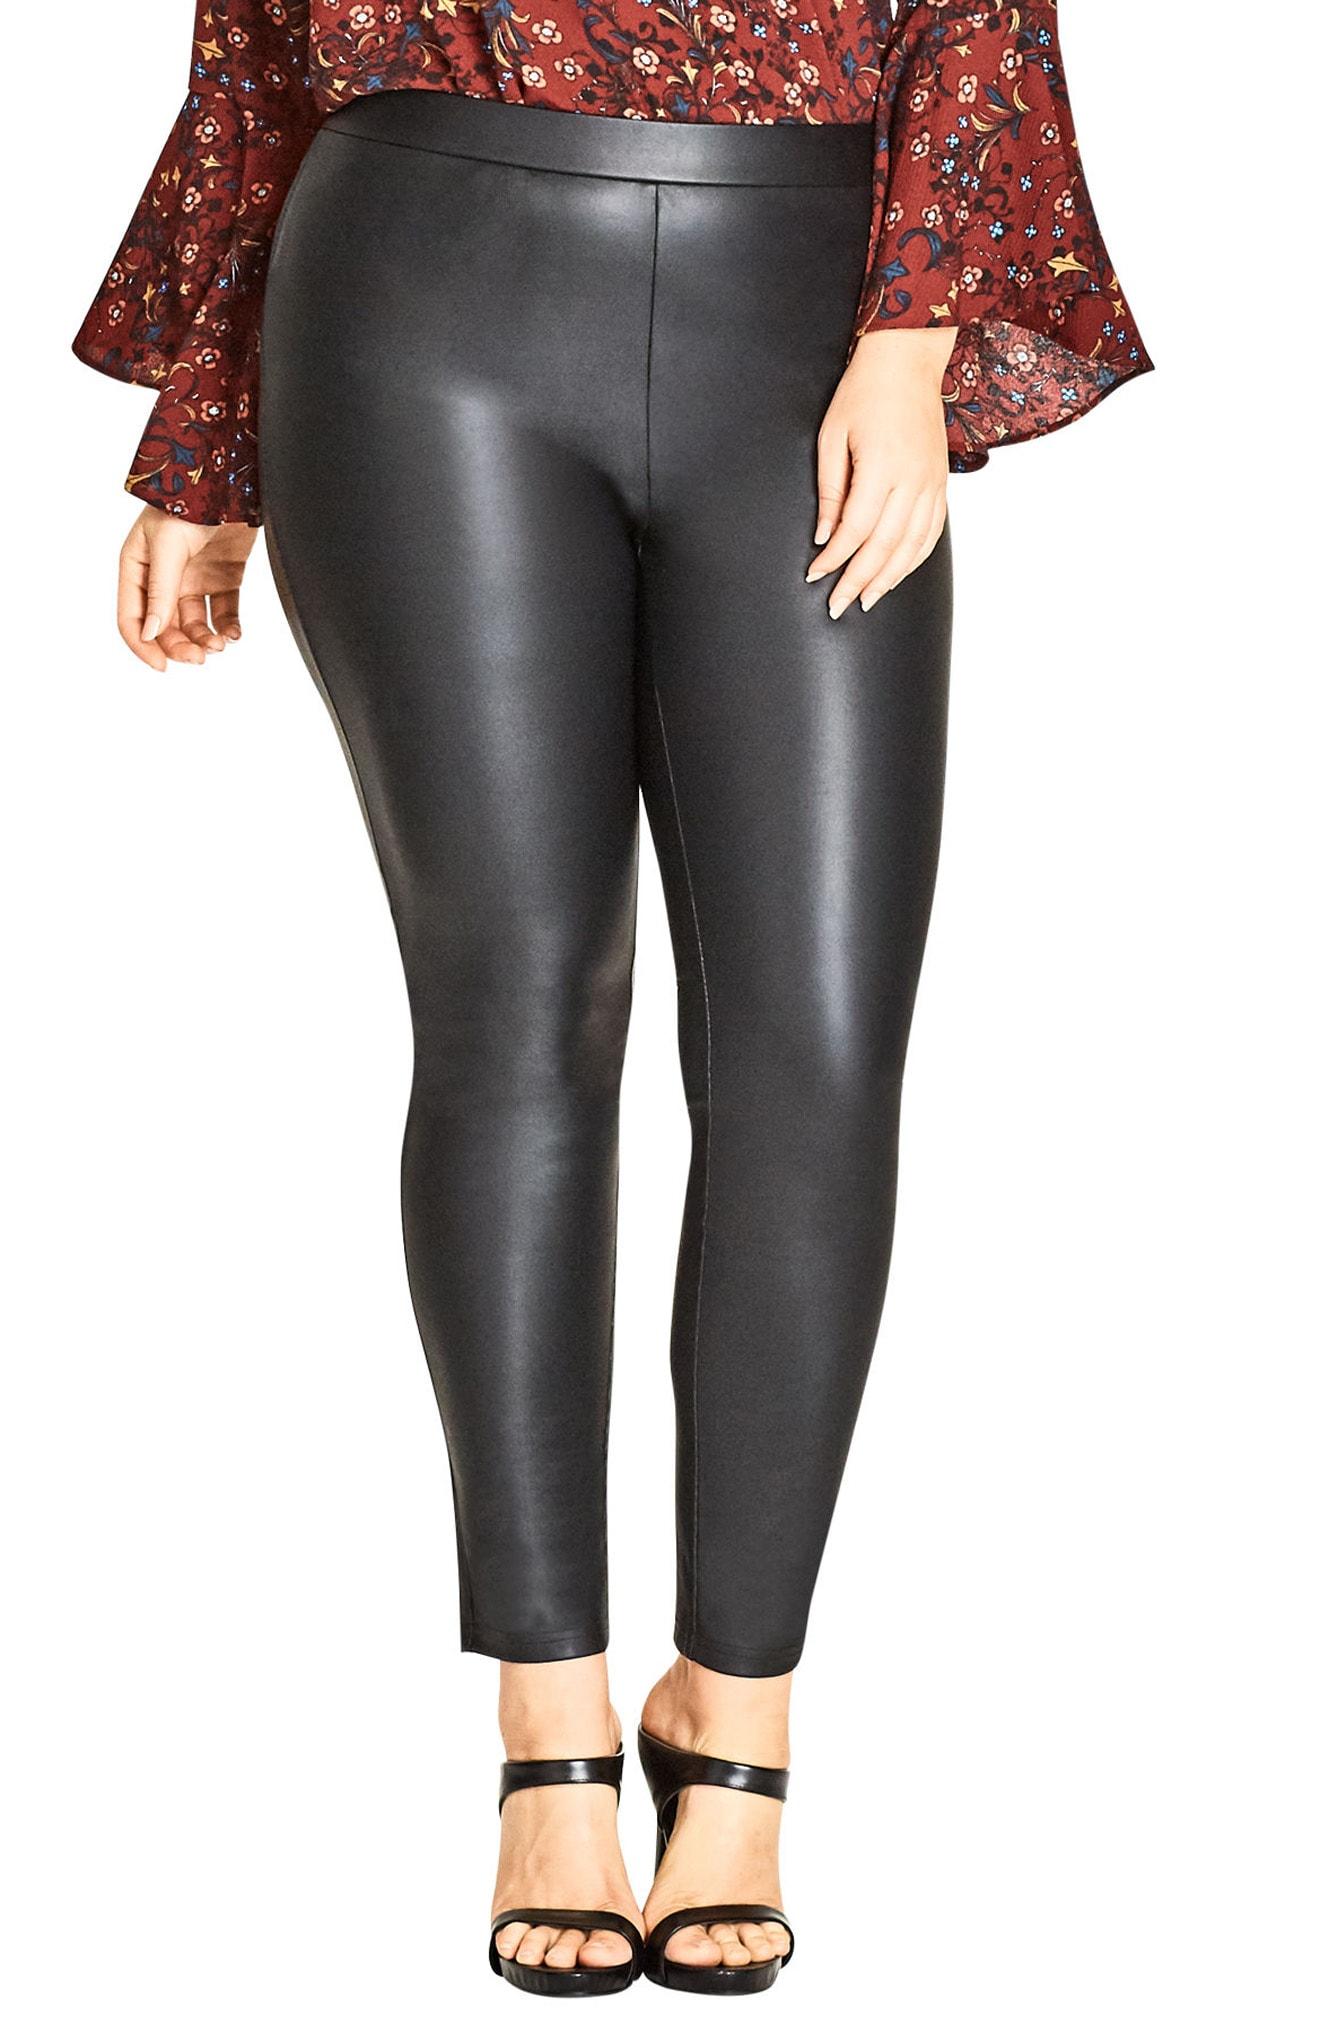 Plus Size 3x Leggings  International Society of Precision Agriculture